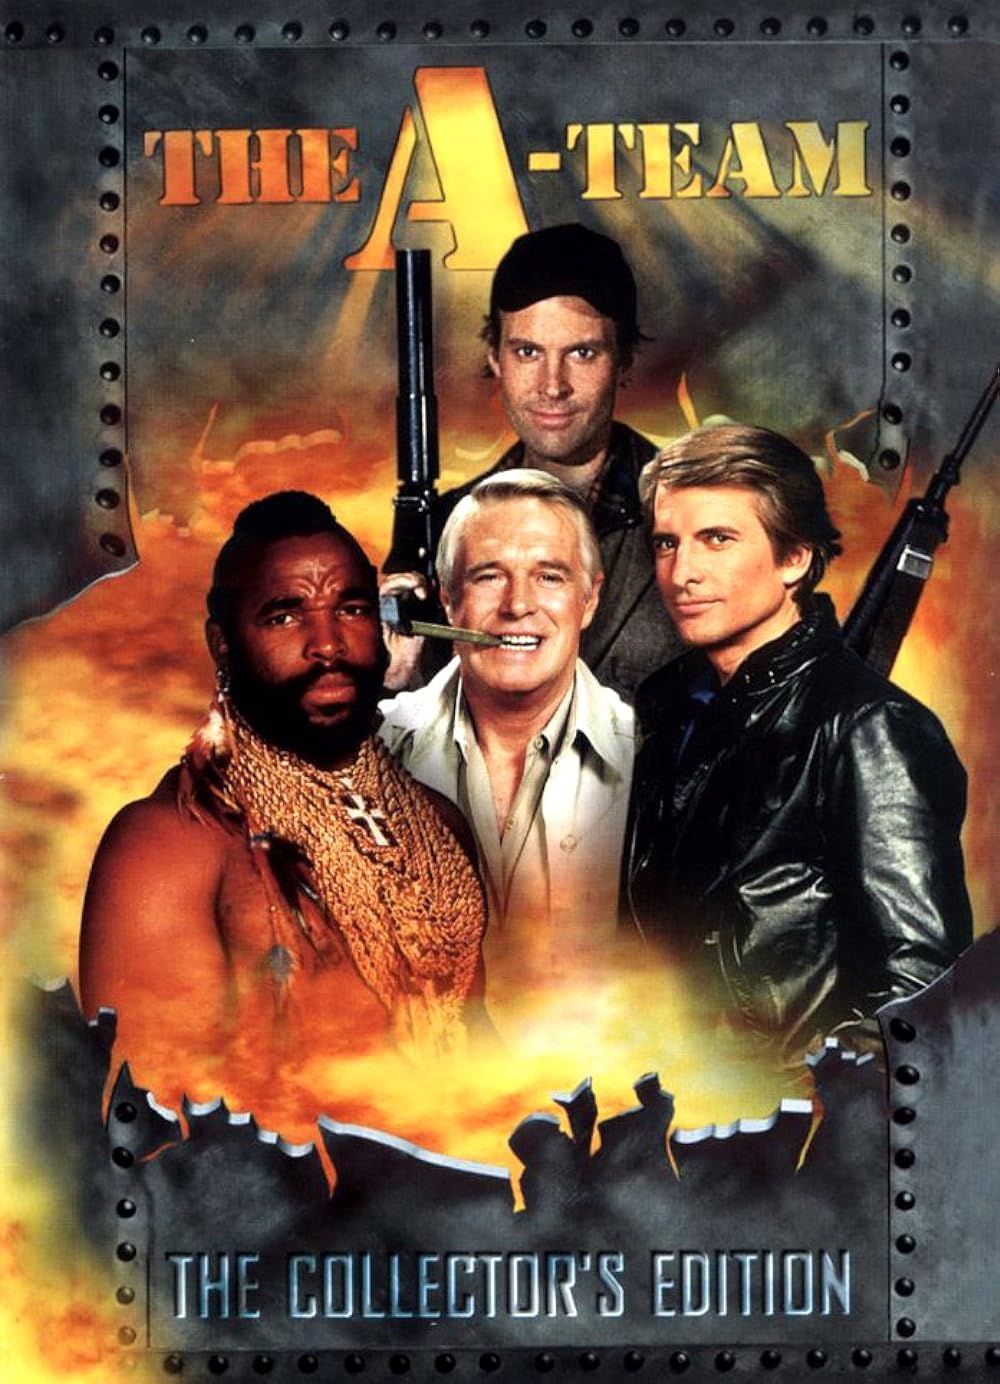 The four main characters of The A-Team on the poster of the series' collector edition